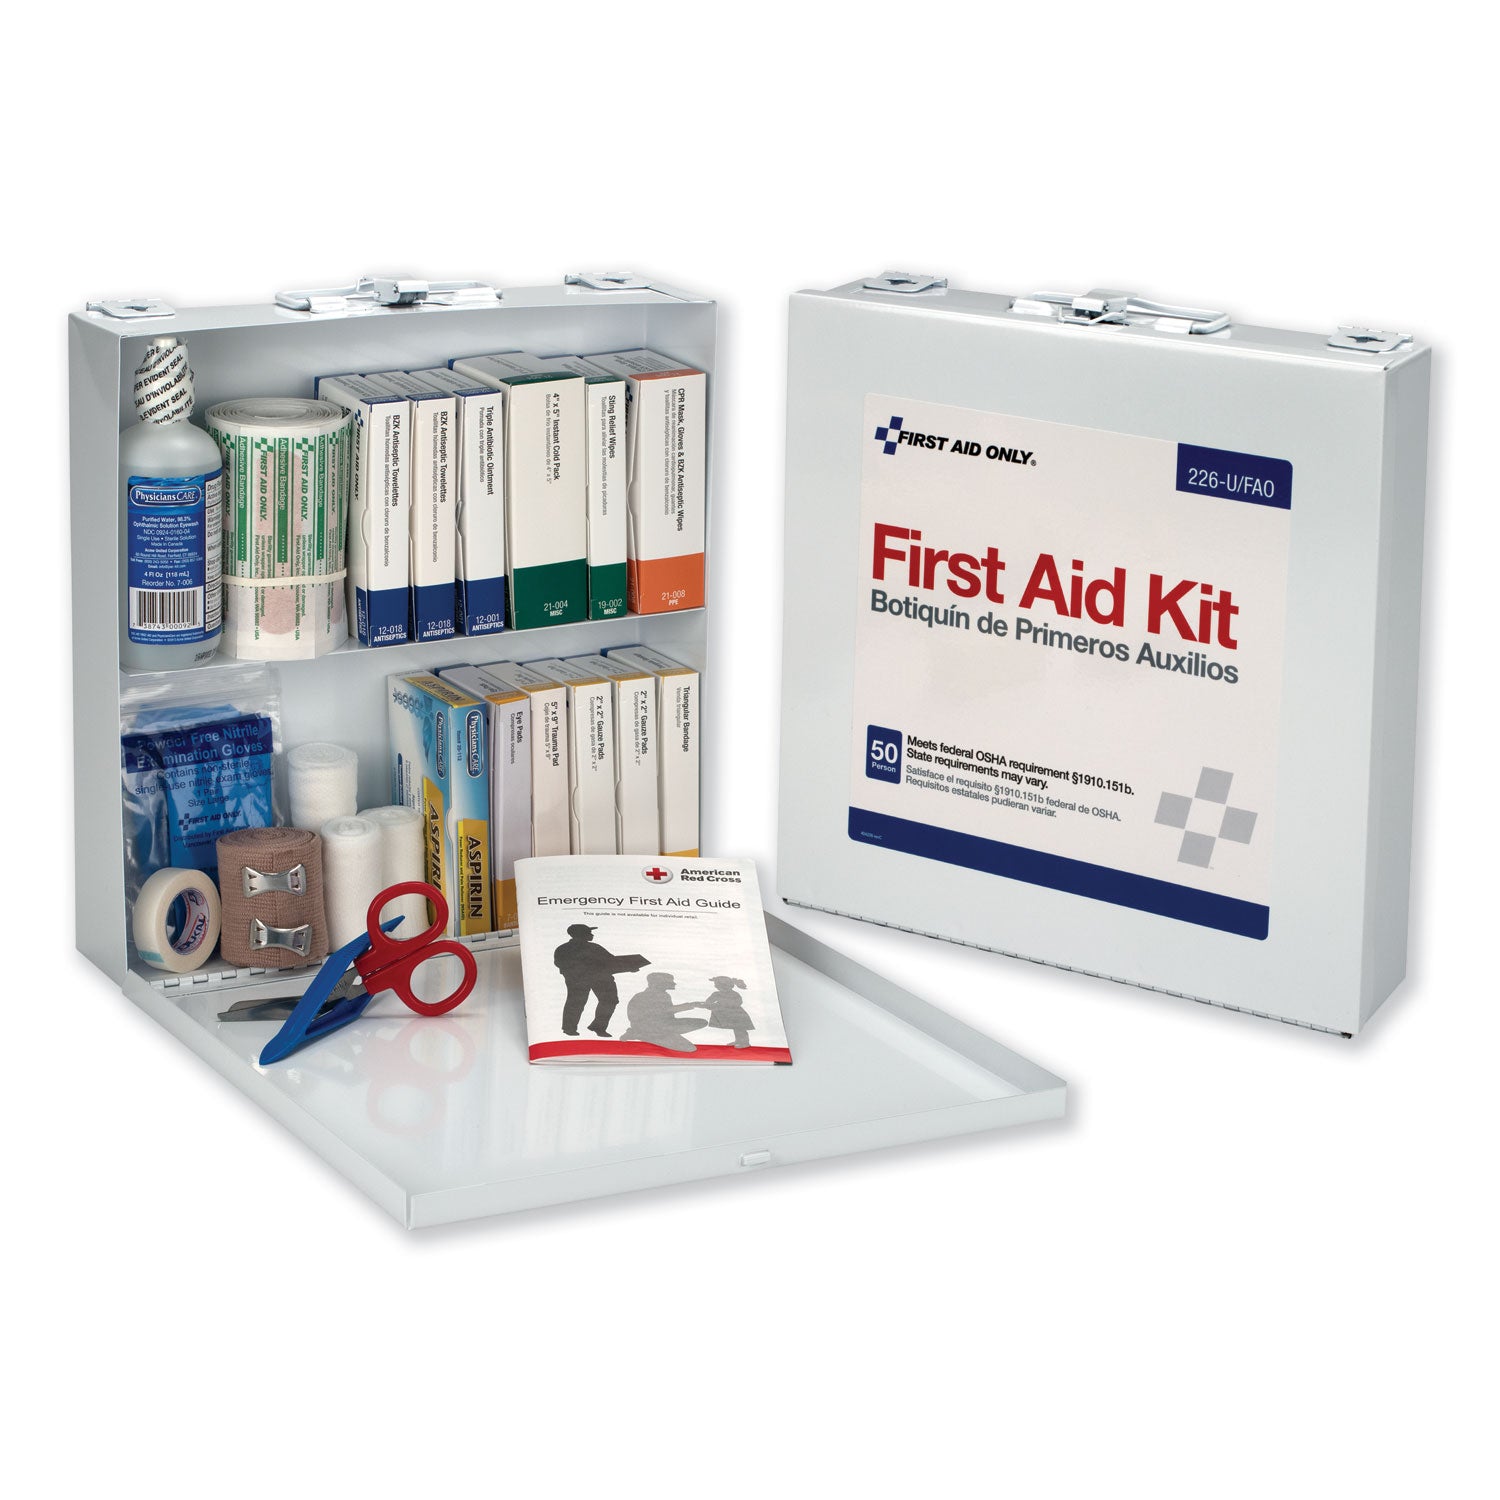 First Aid Station for 50 People, 196 Pieces, OSHA Compliant, Metal Case - 